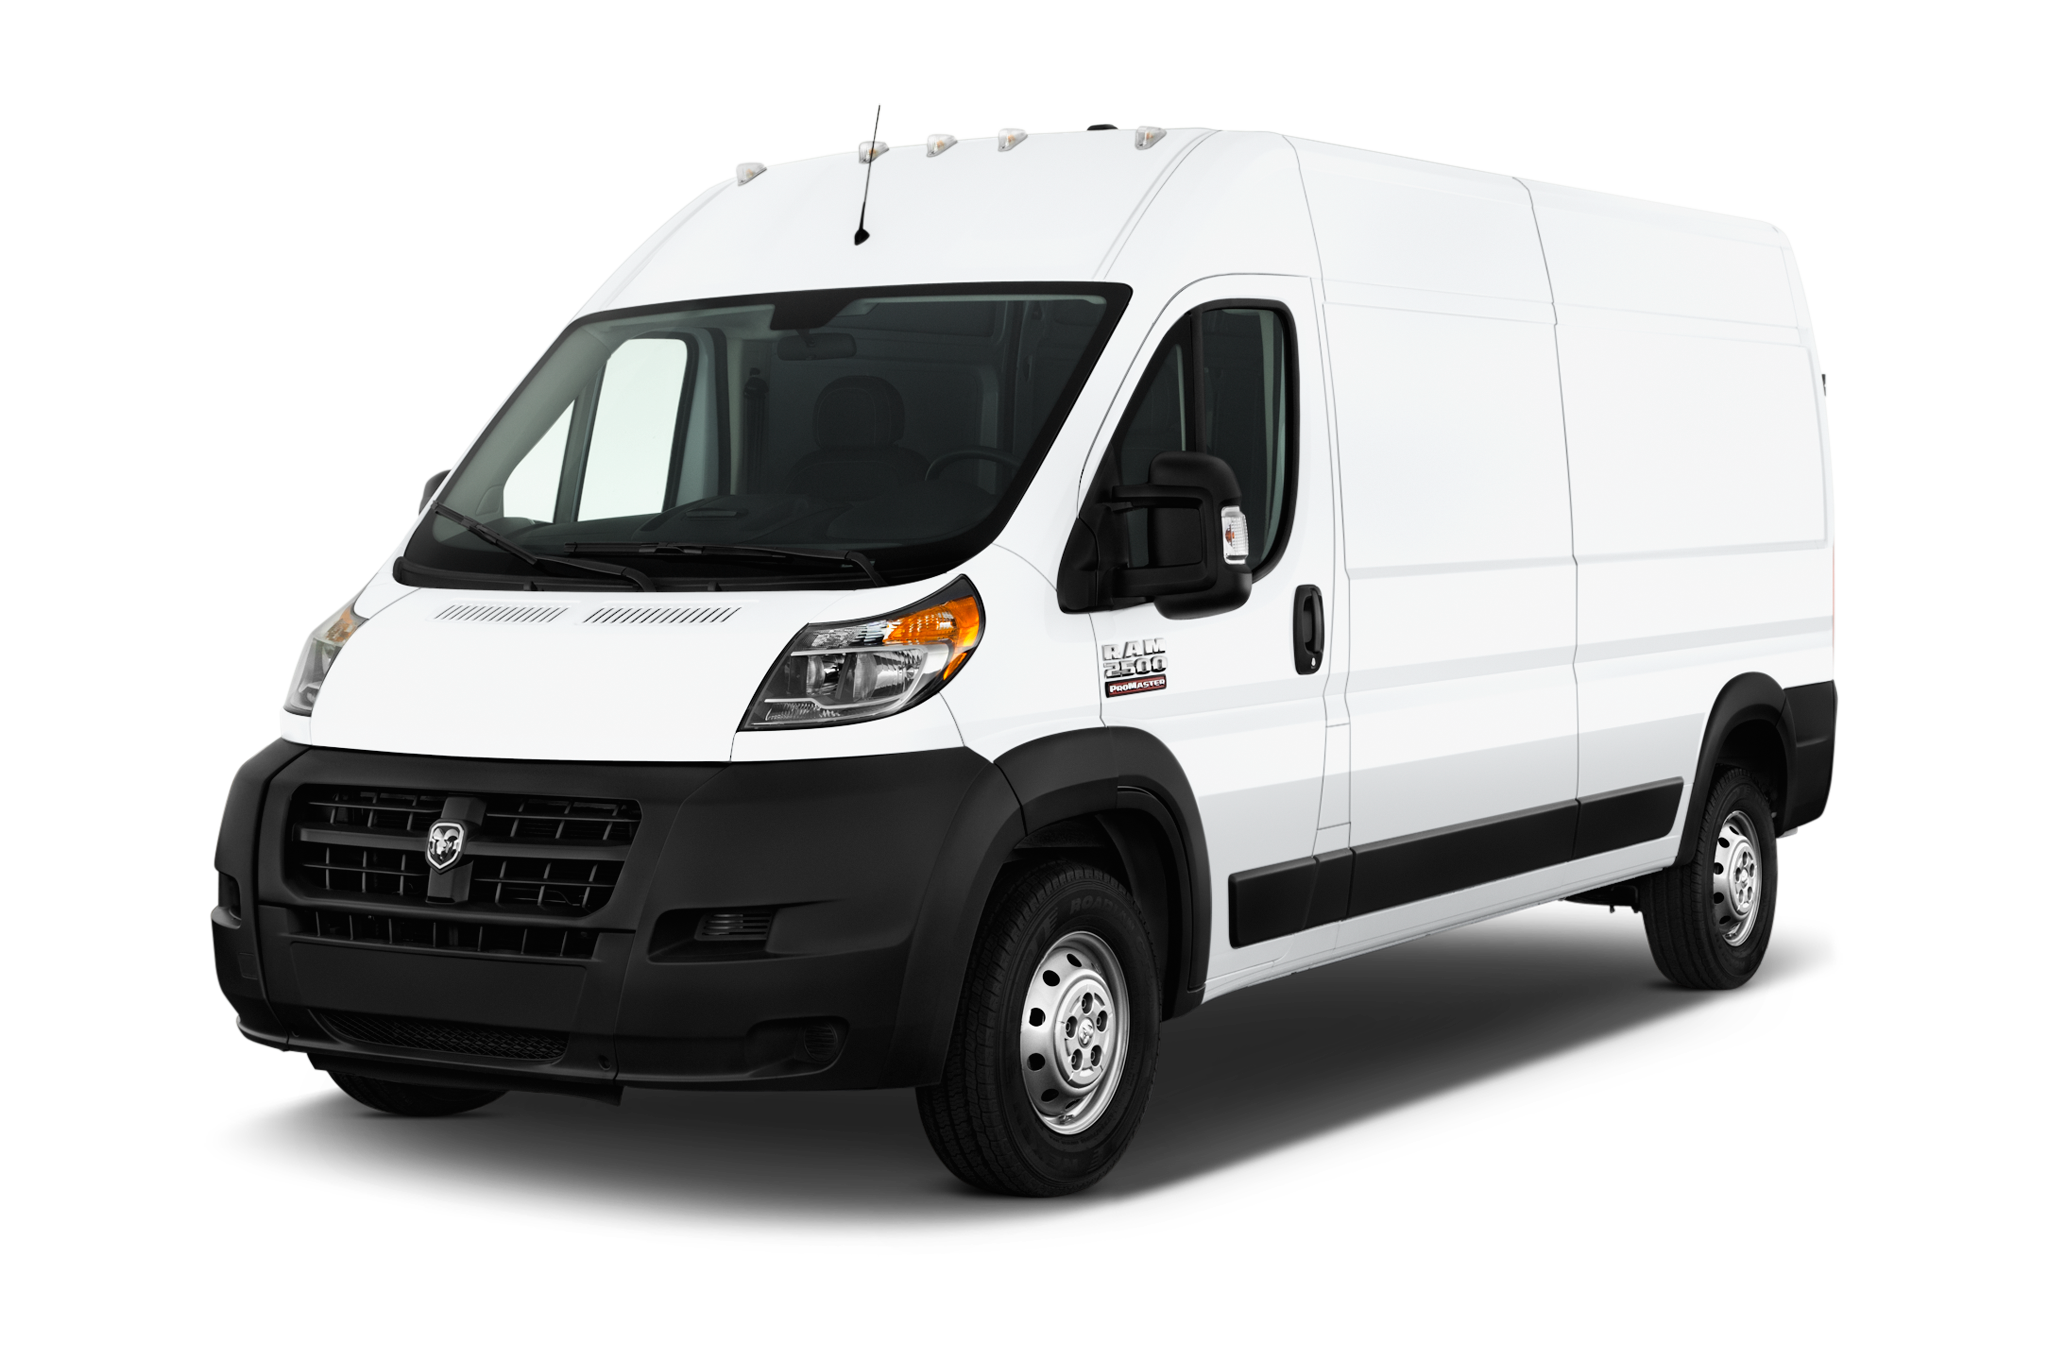 2017 Ram ProMaster Cargo Van 2500 159" WB High Roof Specs and Features